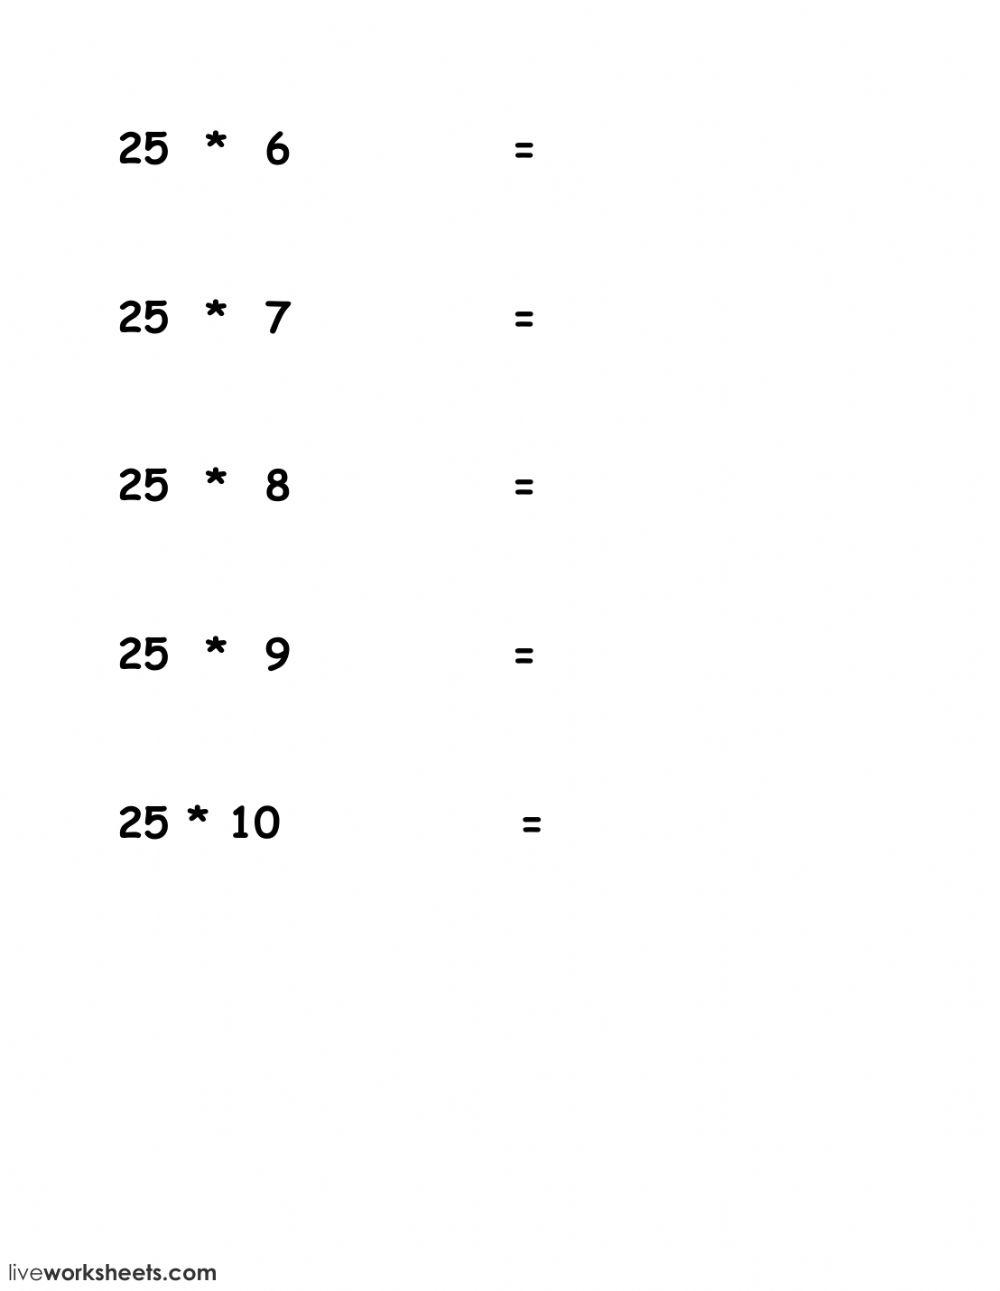 25 times table